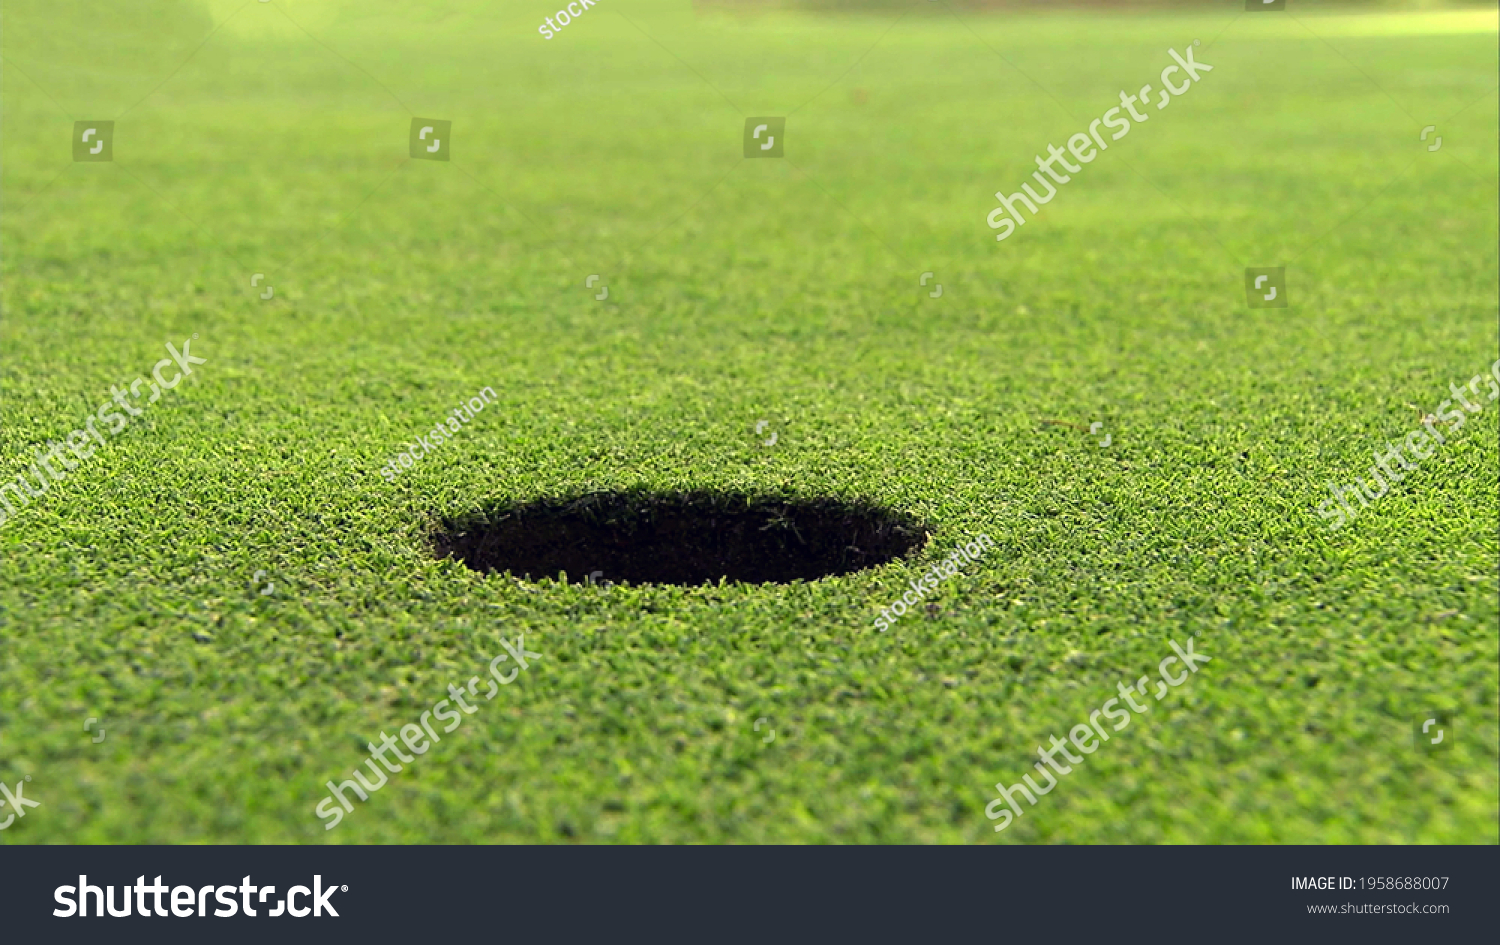 A hole on the golf course in close up view with green grass ground background. #1958688007